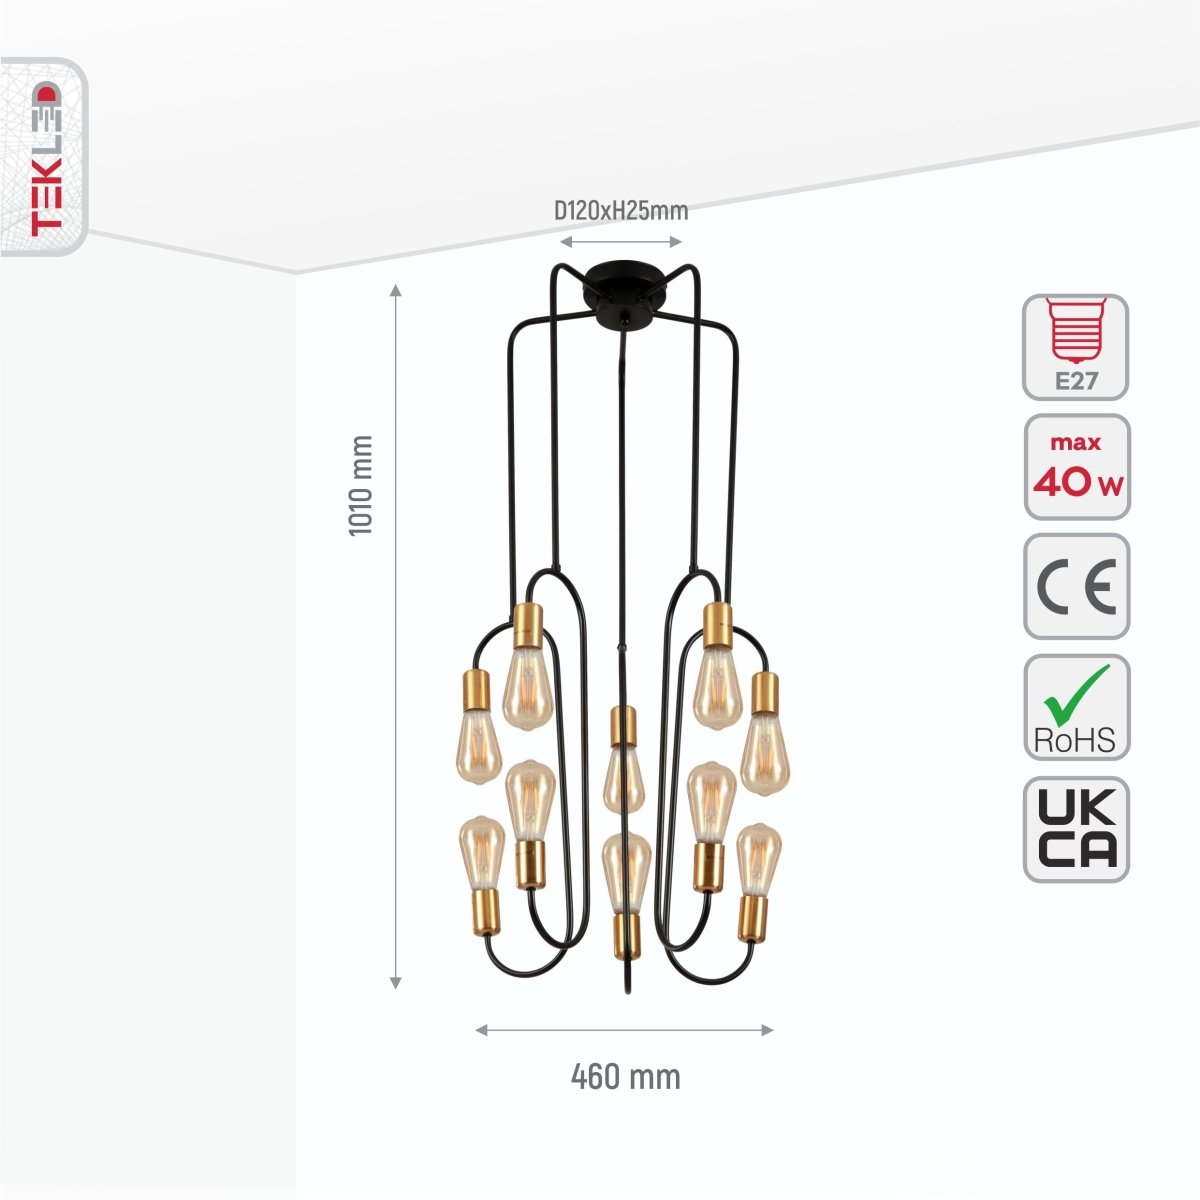 Size and specs of Black and Gold Modern Nordic Pendant Chandelier Light with 10xE27 Fittings | TEKLED 159-17482